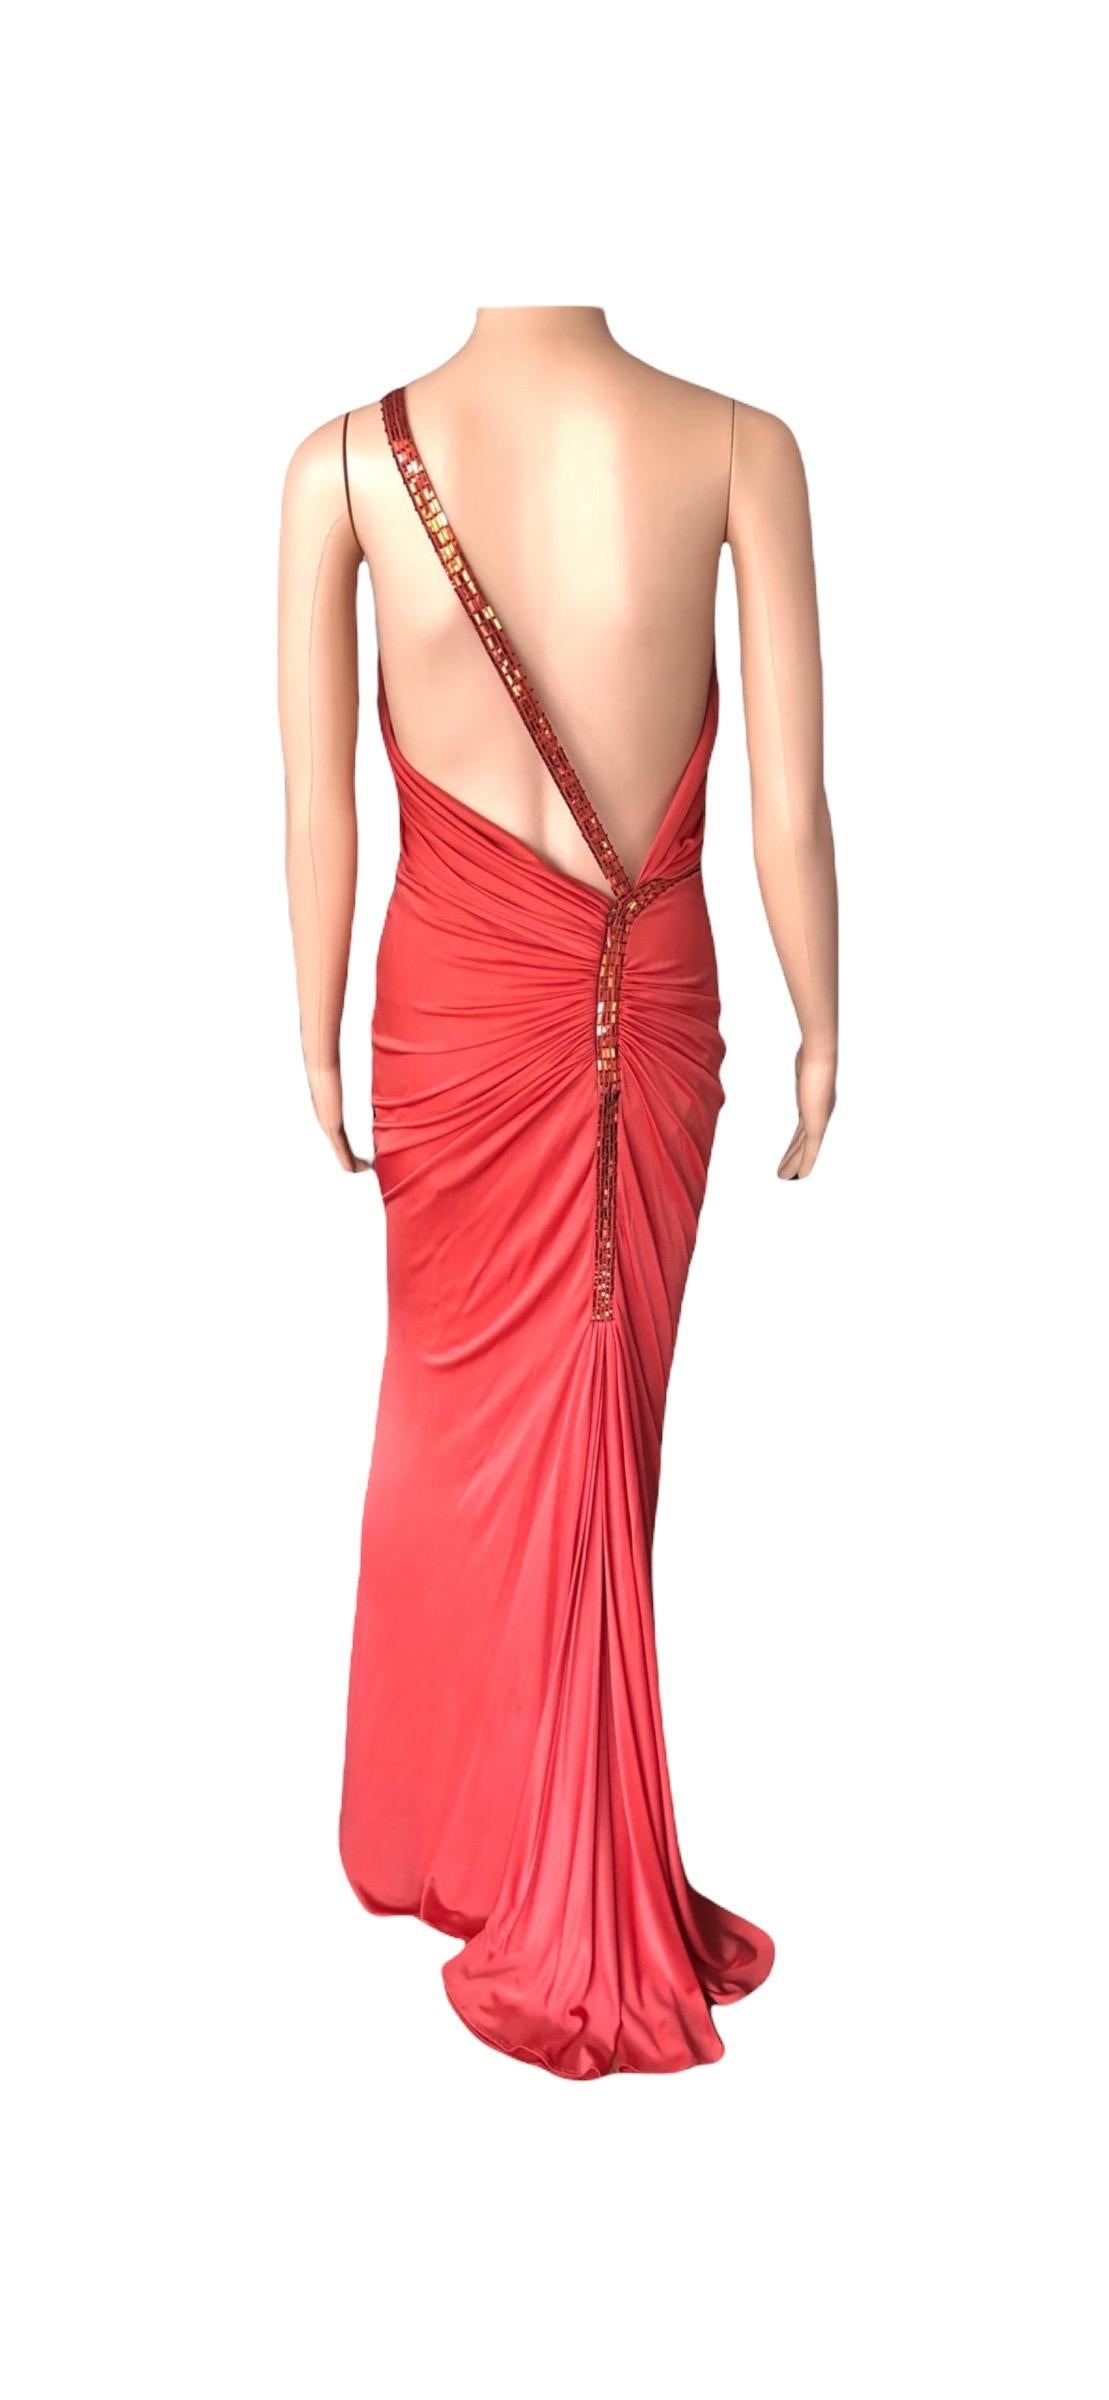 Gianni Versace S/S 2001 Runway Embellished Backless Evening Dress Gown For Sale 7